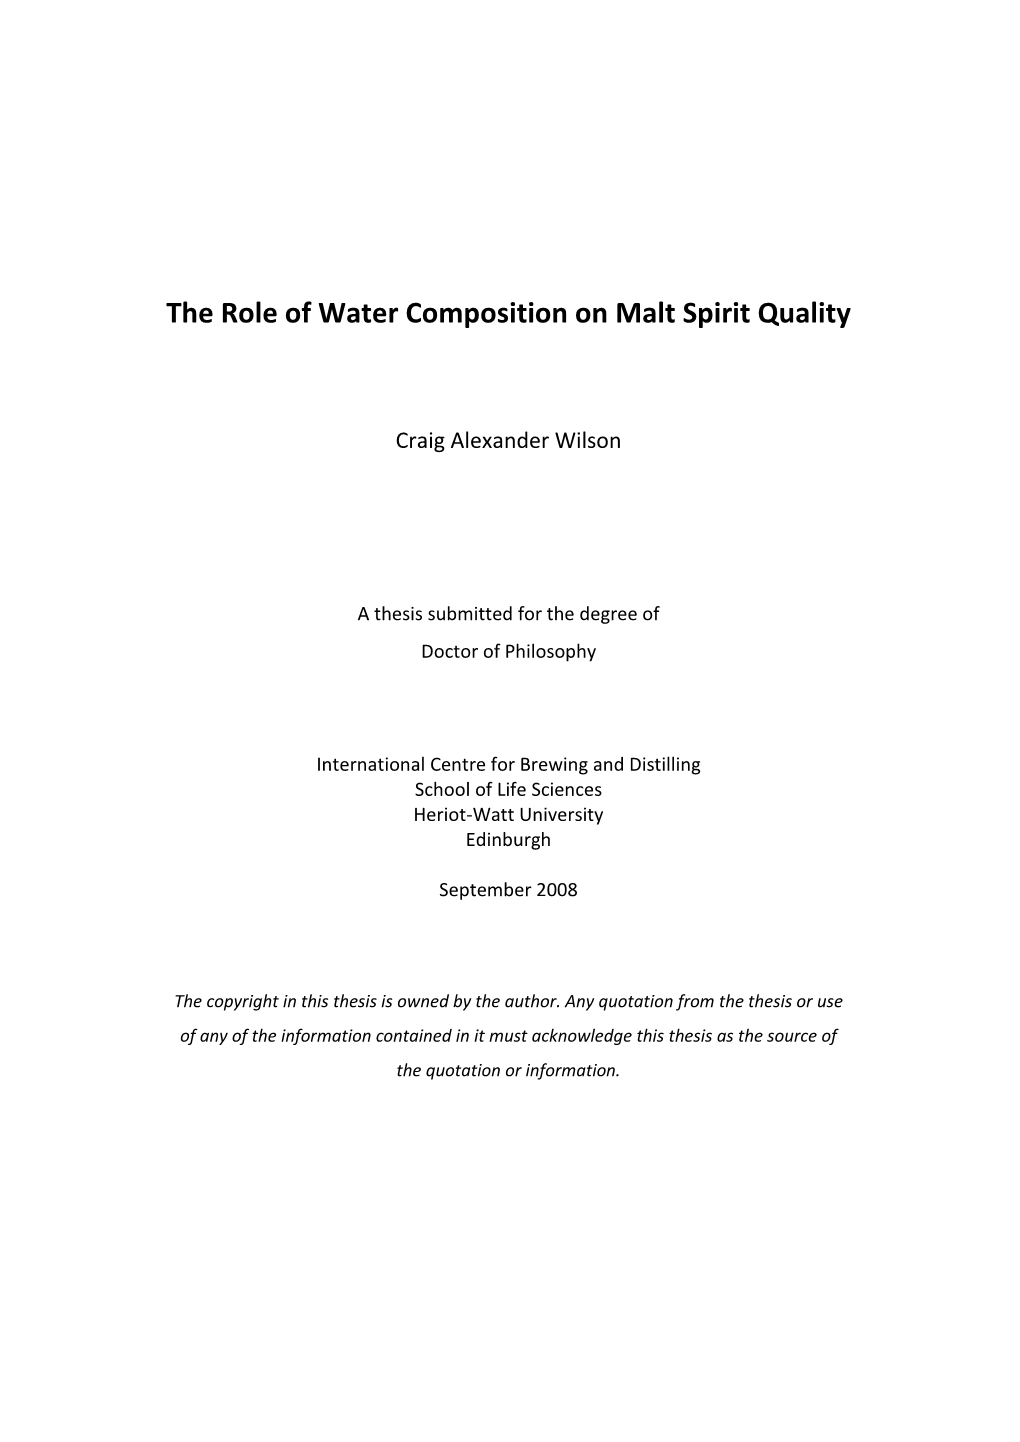 The Role of Water Composition in Malt Spirit Quality